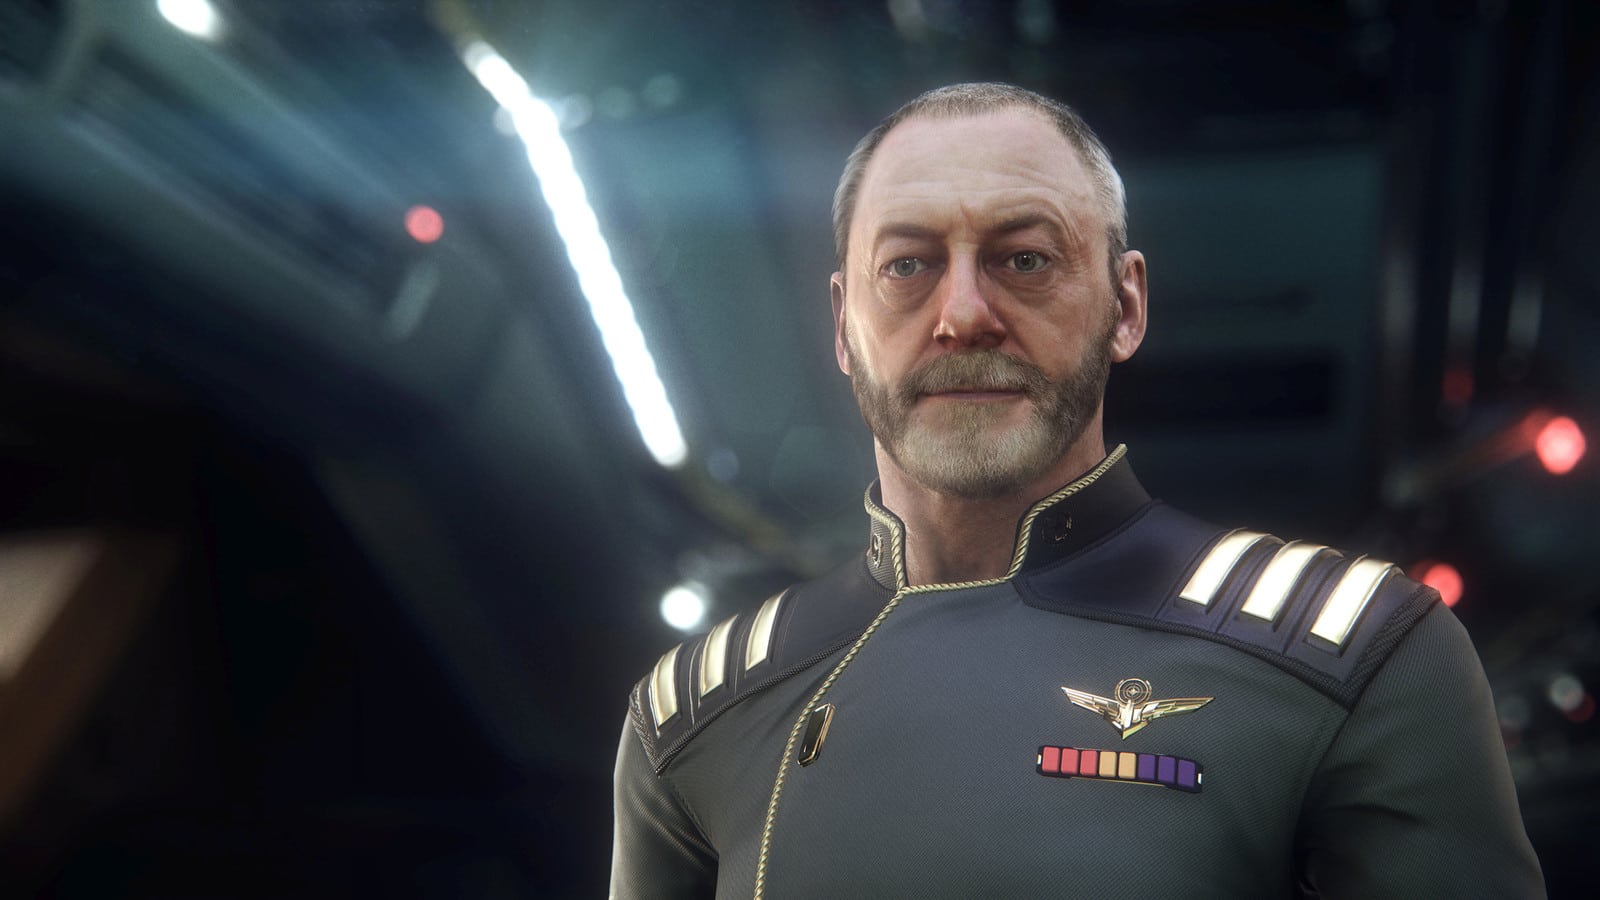 Star Citizen Doc Reveals Why Squadron 42 Demo Was Pulled from CitCon |  eTeknix